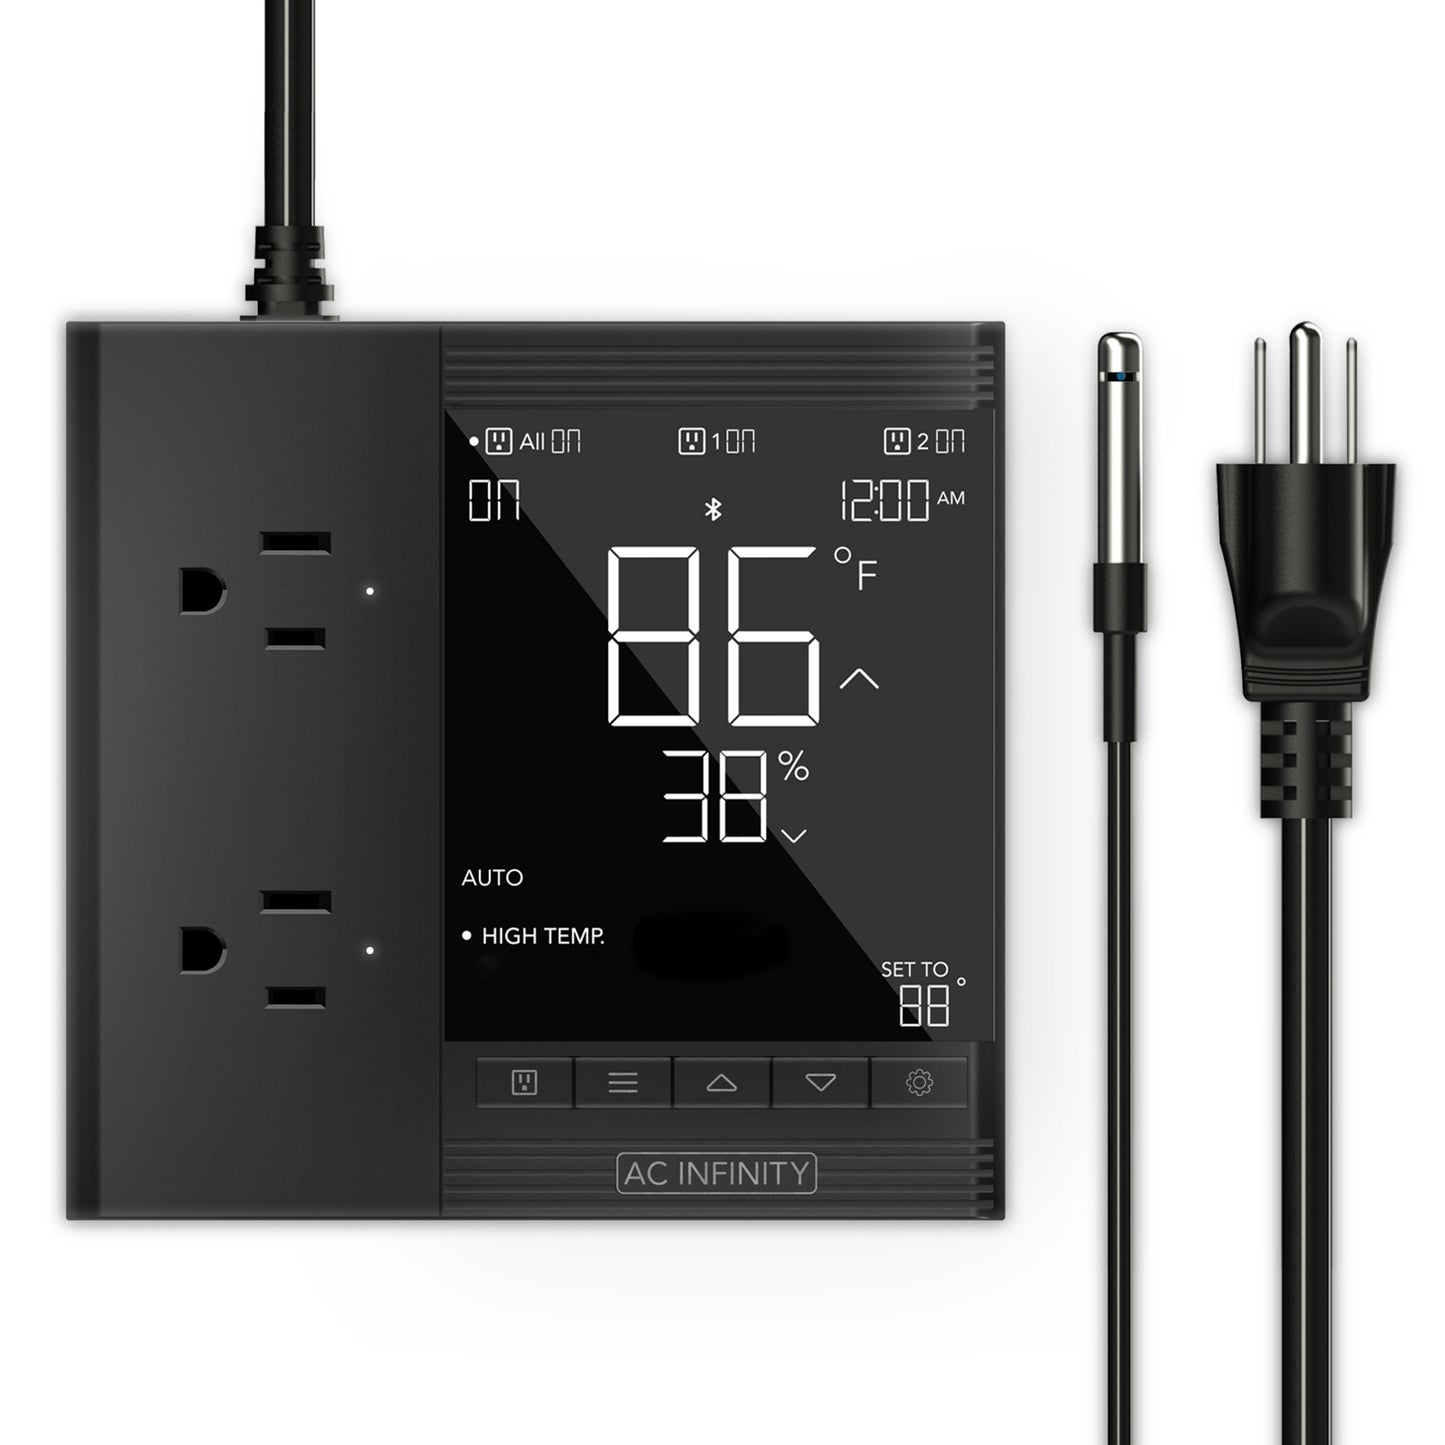 CONTROLLER 75, SMART OUTLET CONTROLLER, TEMPERATURE, HUMIDITY, SCHEDULE PROGRAMS FOR TWO DEVICES, DATA APP, BLUETOOTH